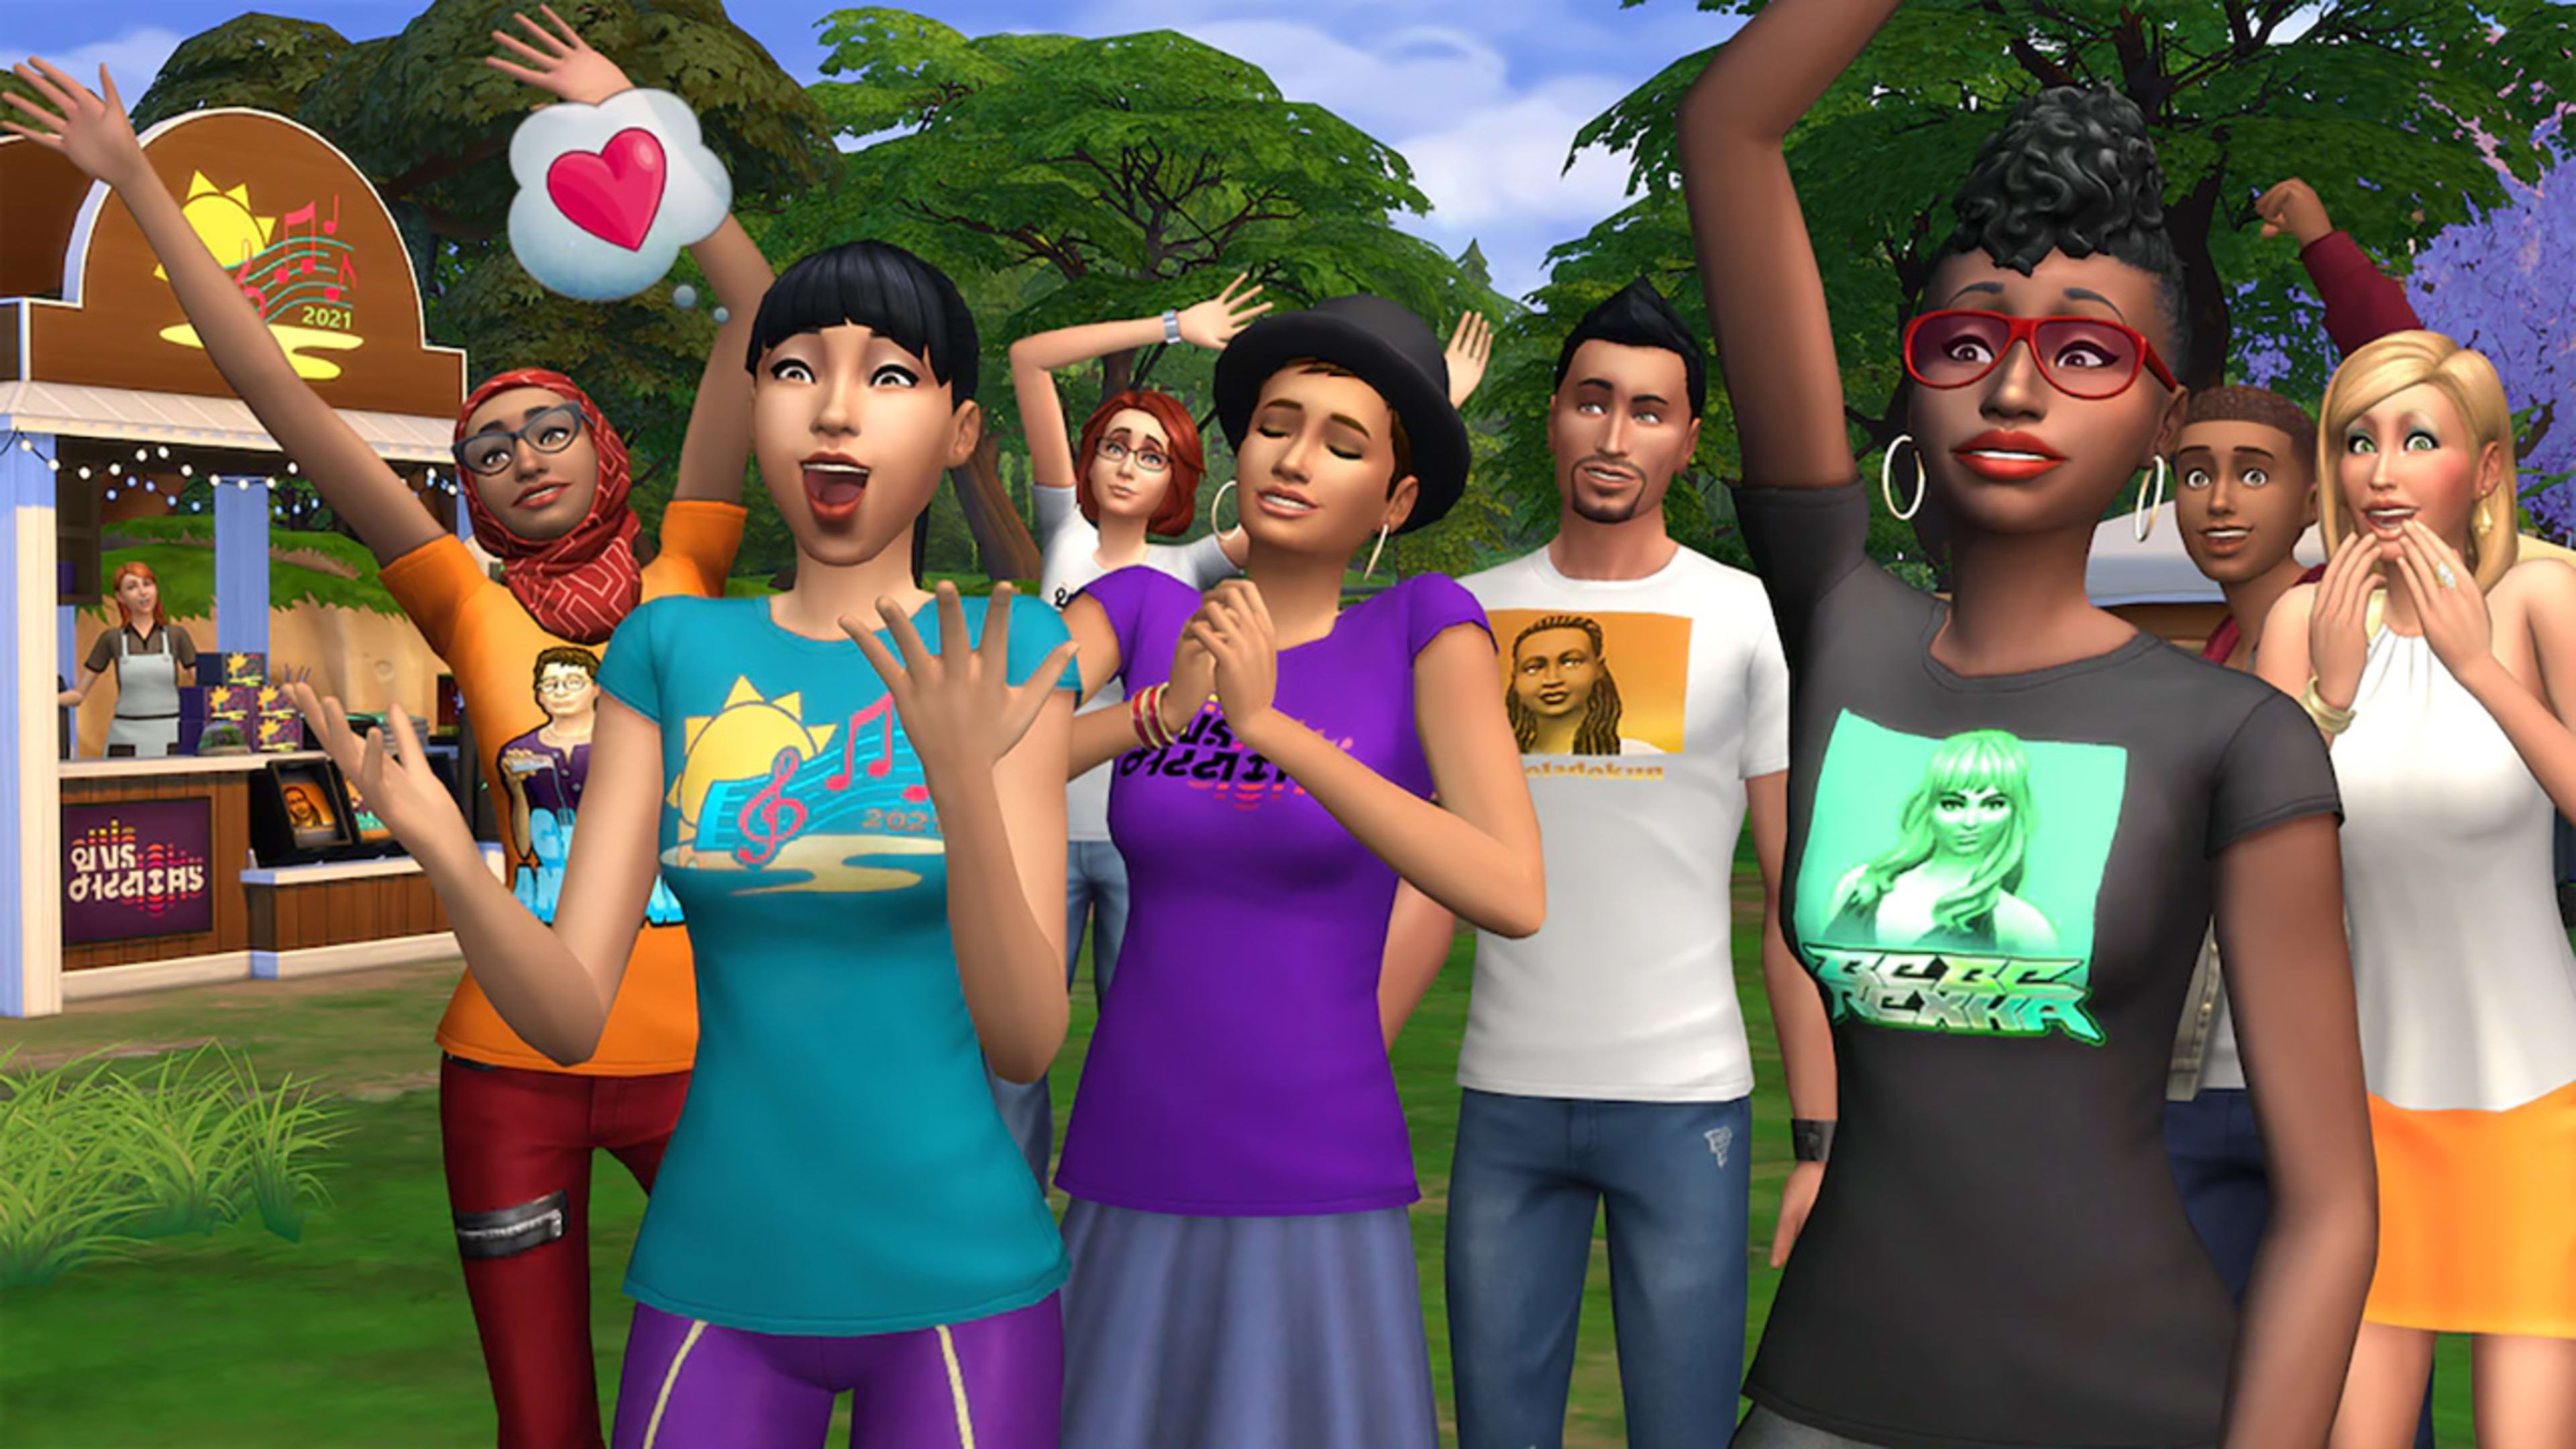 EA teams up with Overwolf to launch a new hub for creators’ mods to ‘The Sims’